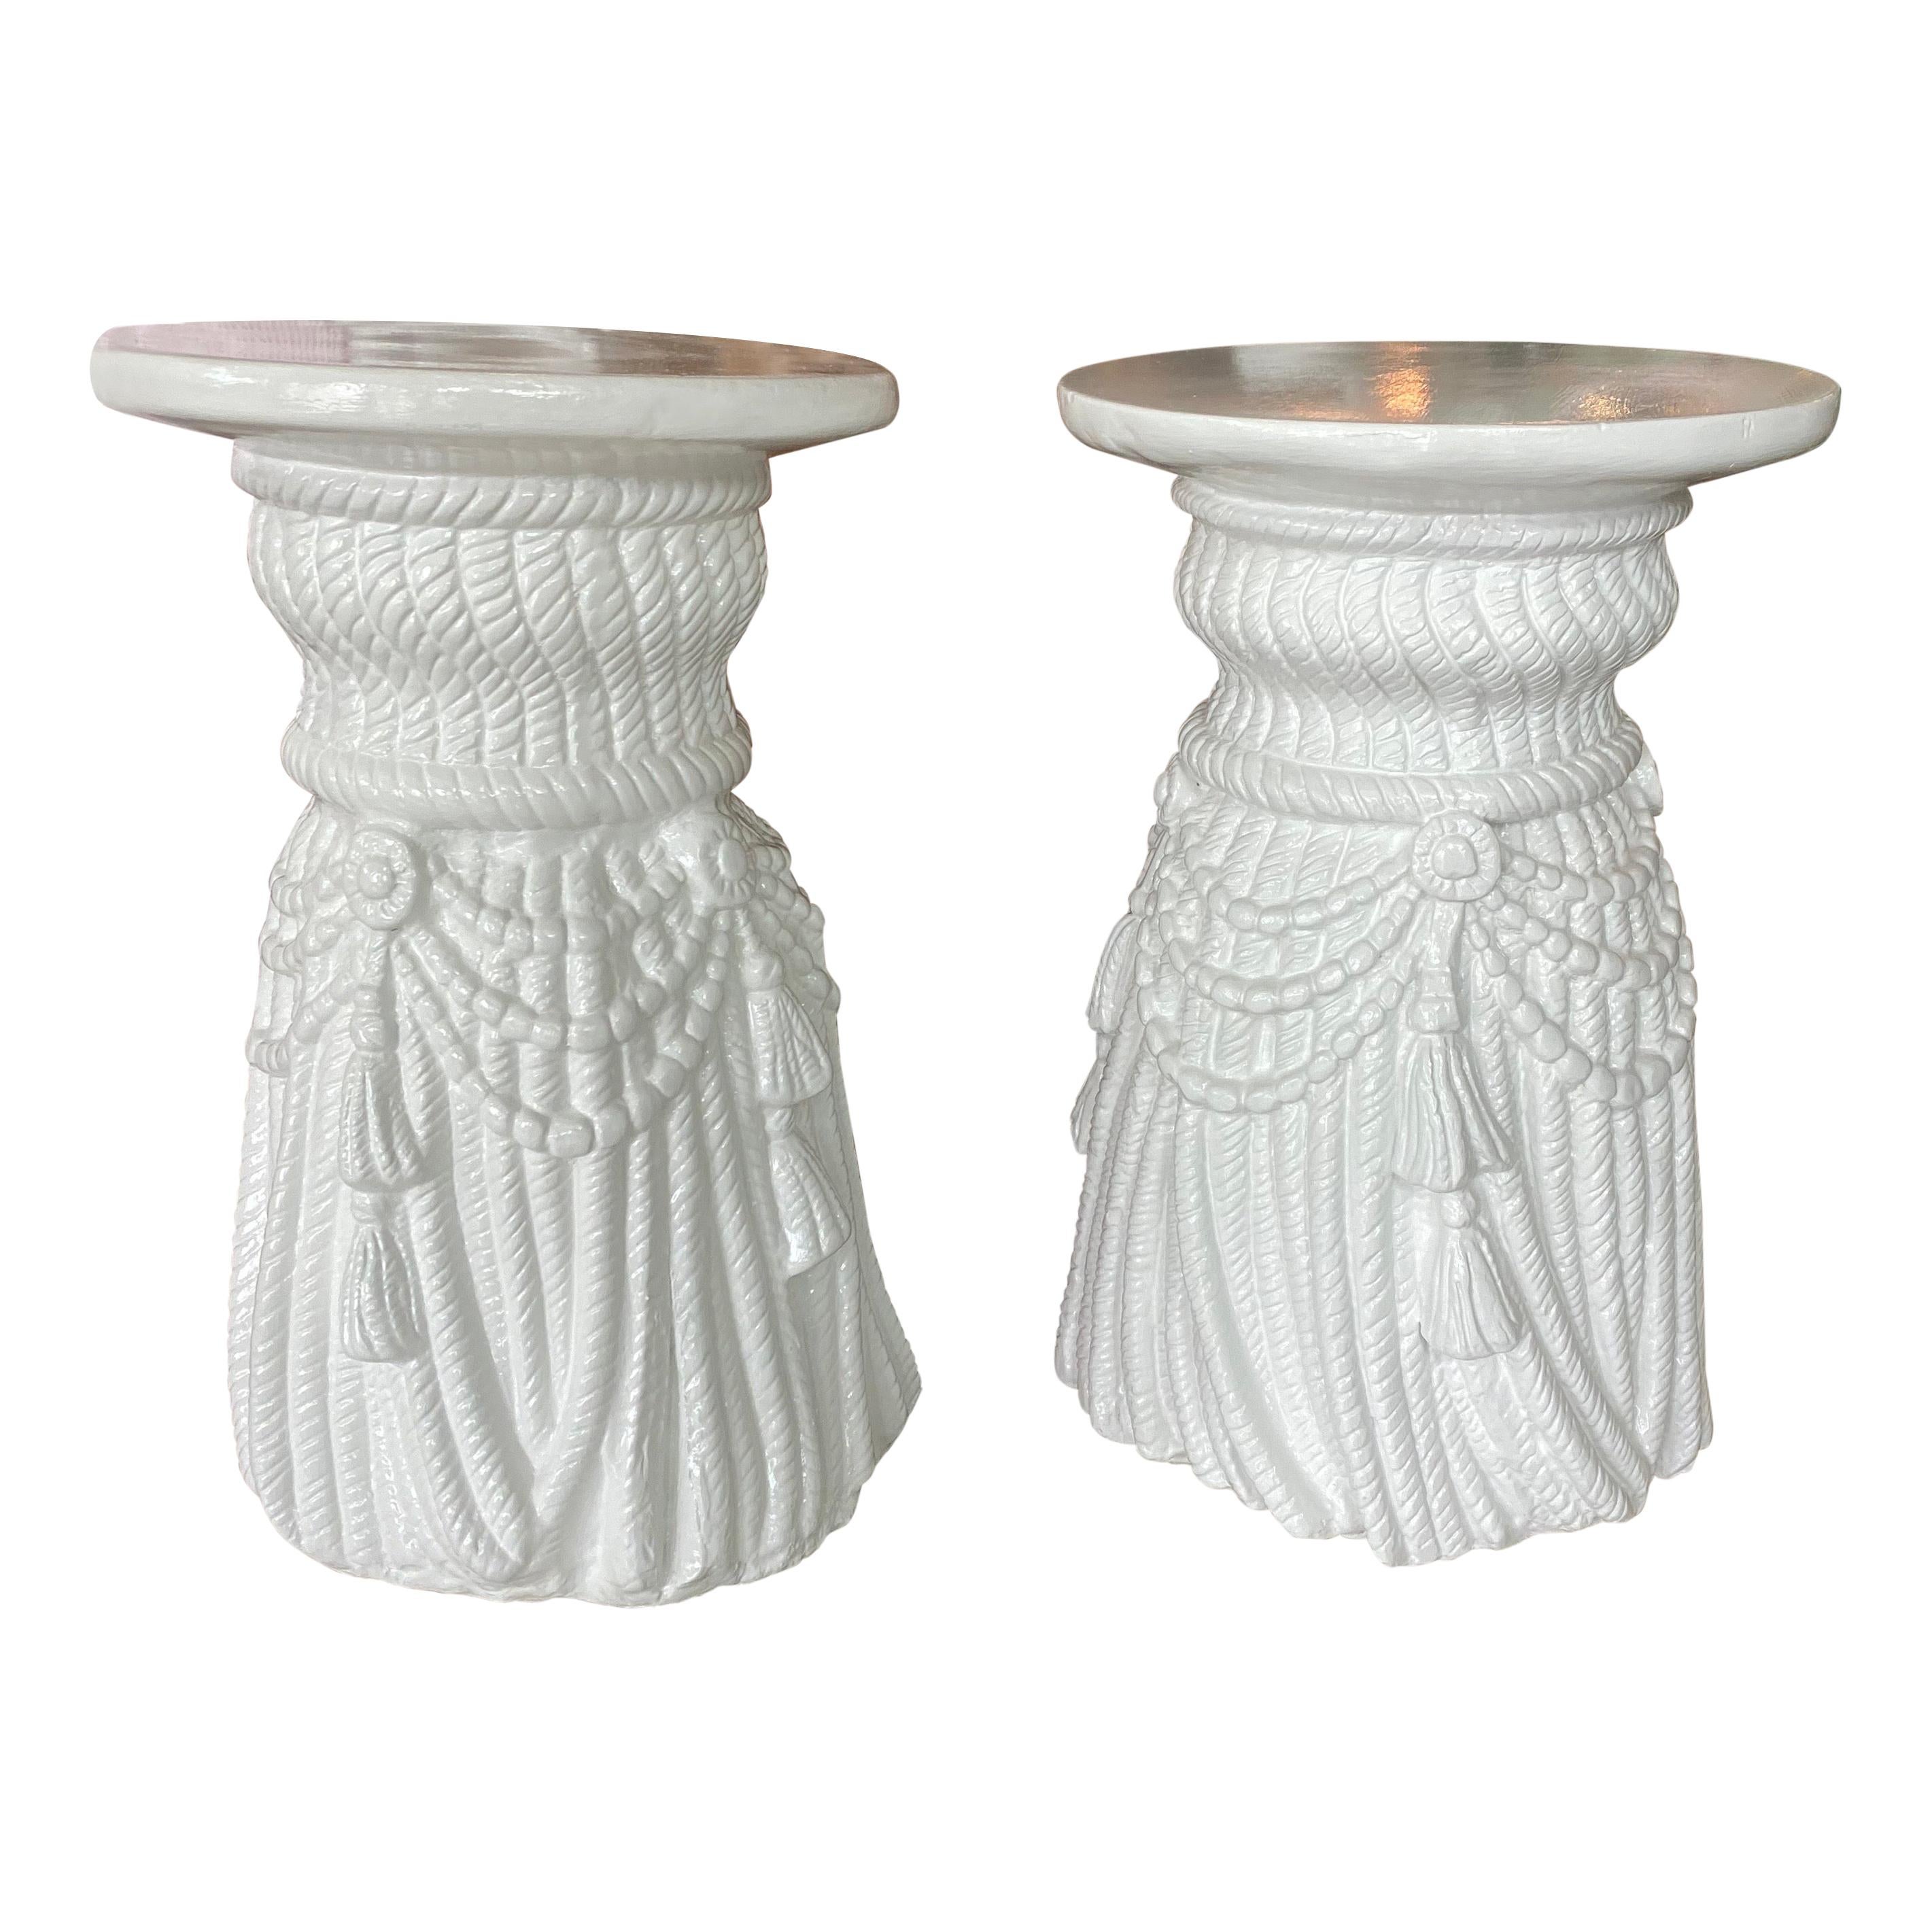 Vintage Pair of White Plaster Lacquered Draped Tassel Garden Stools Stands